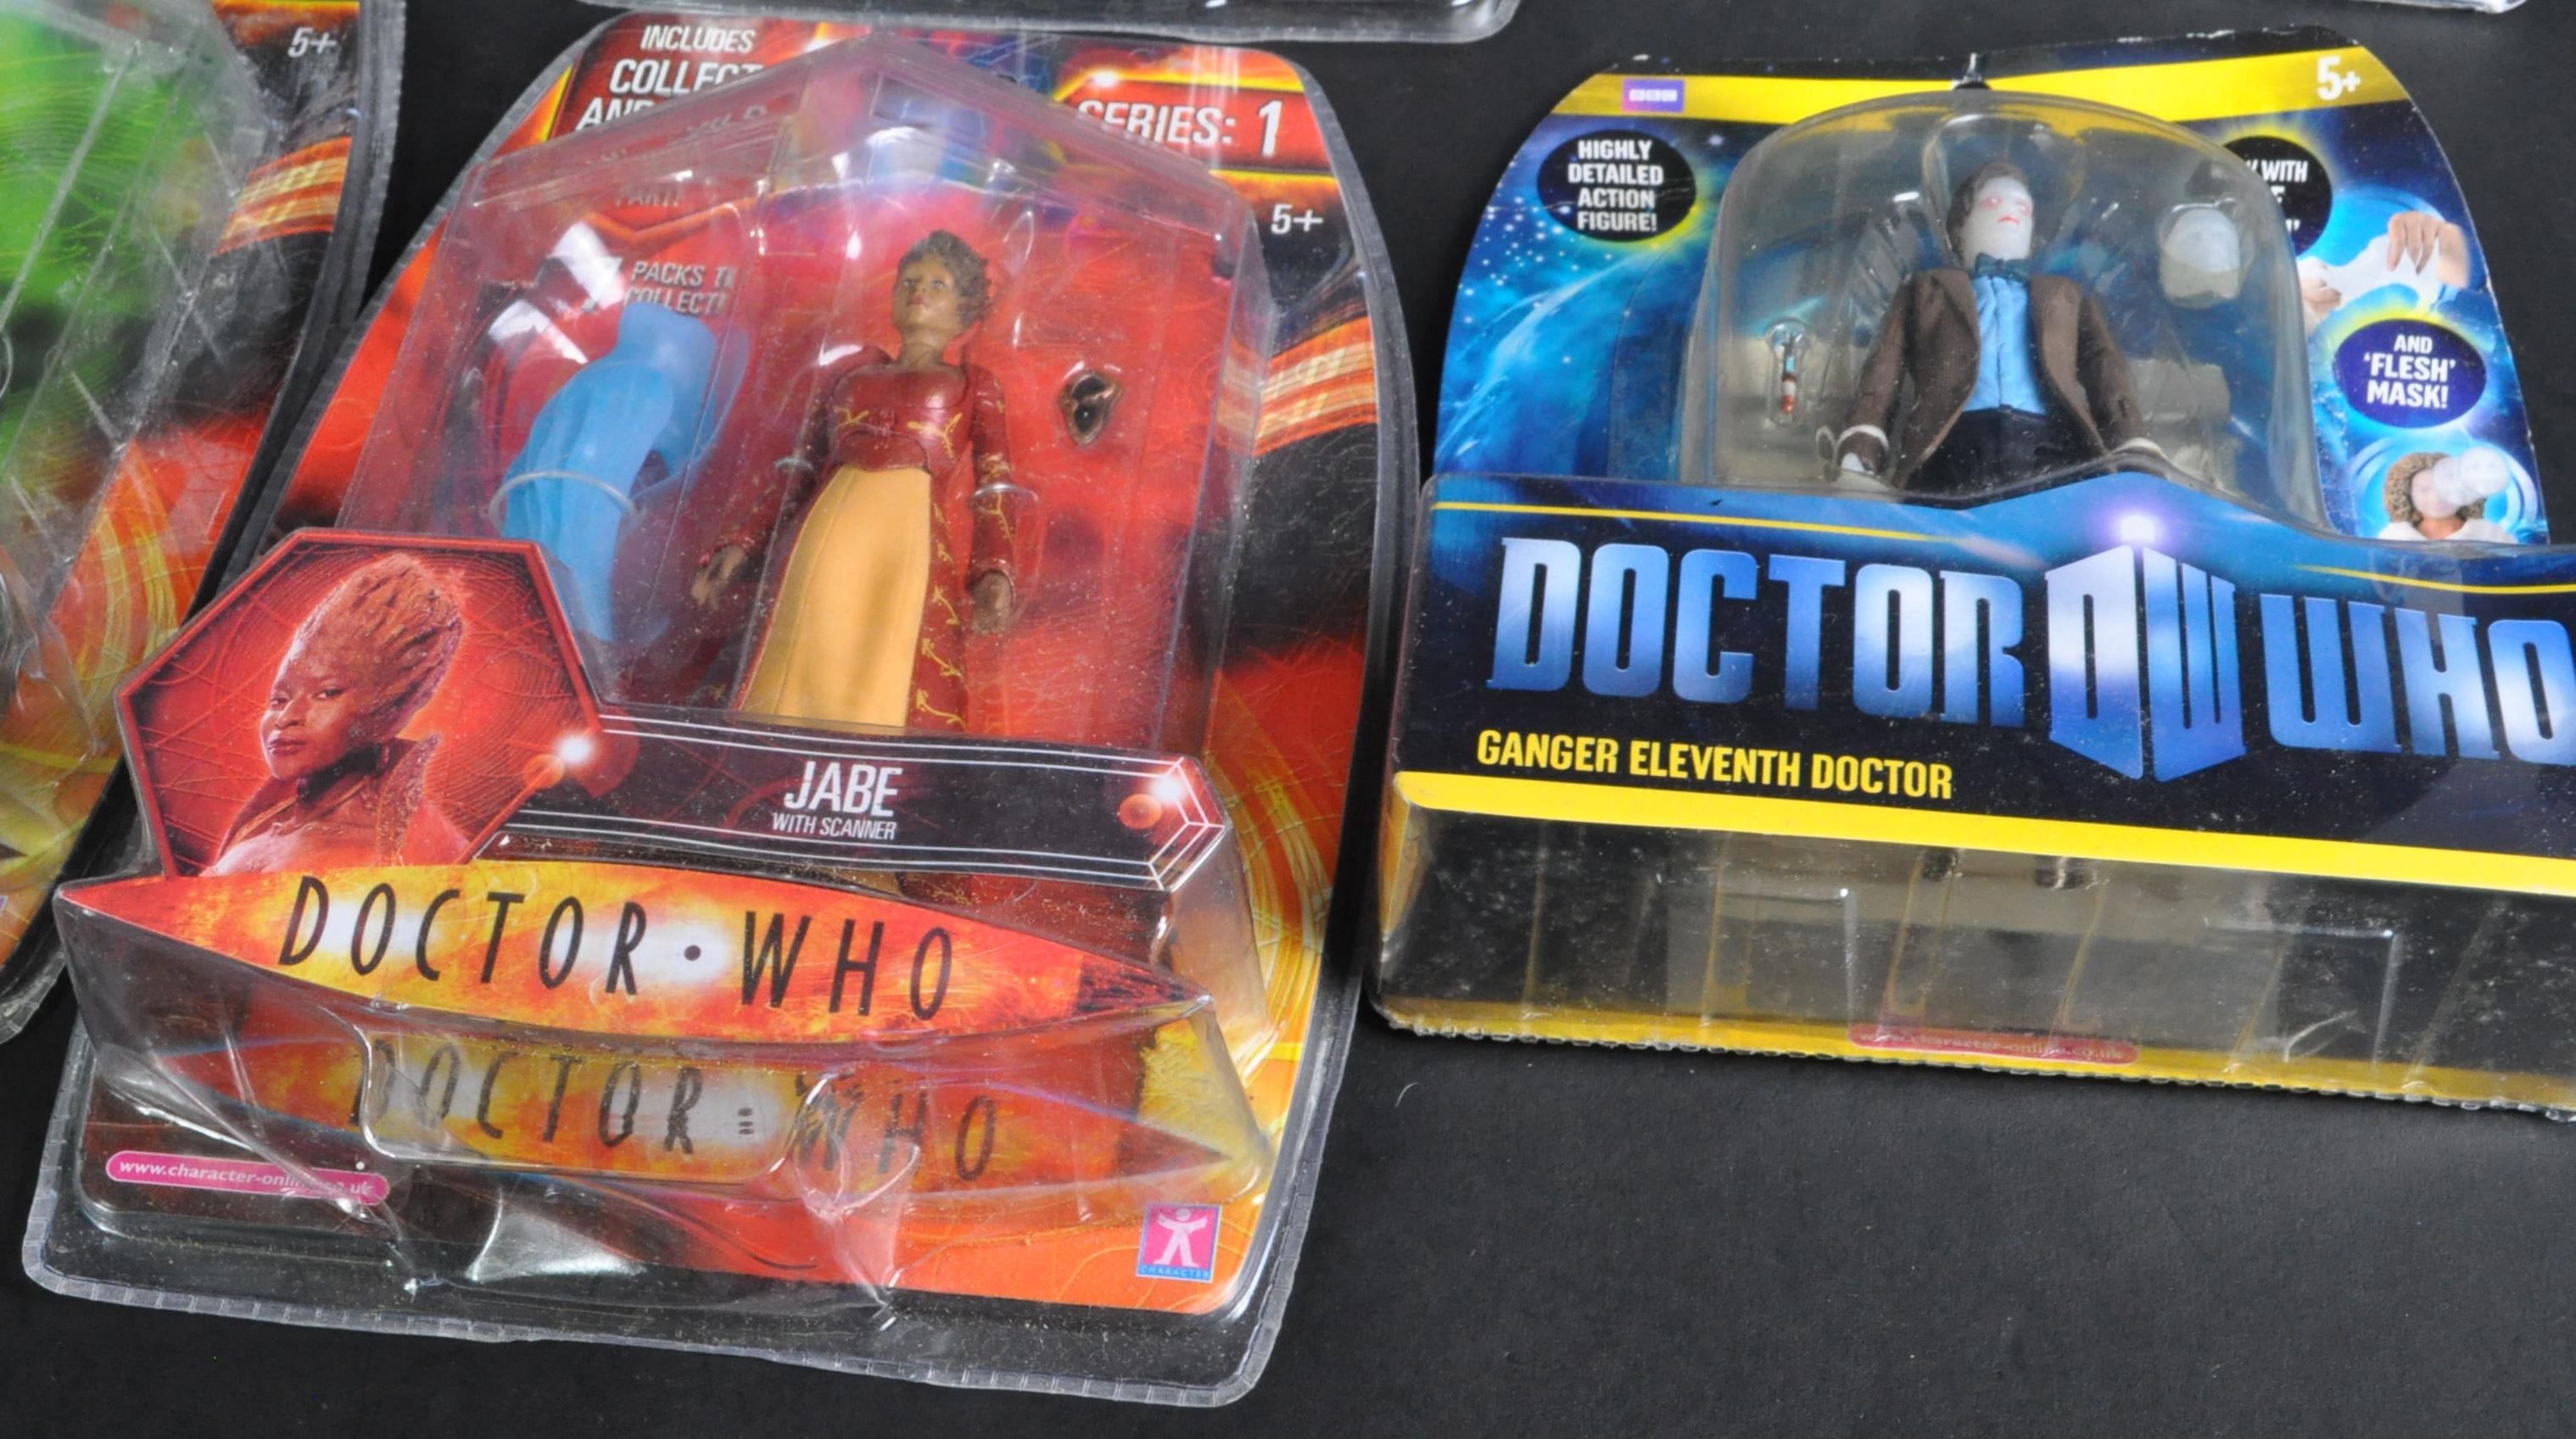 DOCTOR WHO - CHARACTER OPTIONS - COLLECTION OF ACTION FIGURES - Image 6 of 8